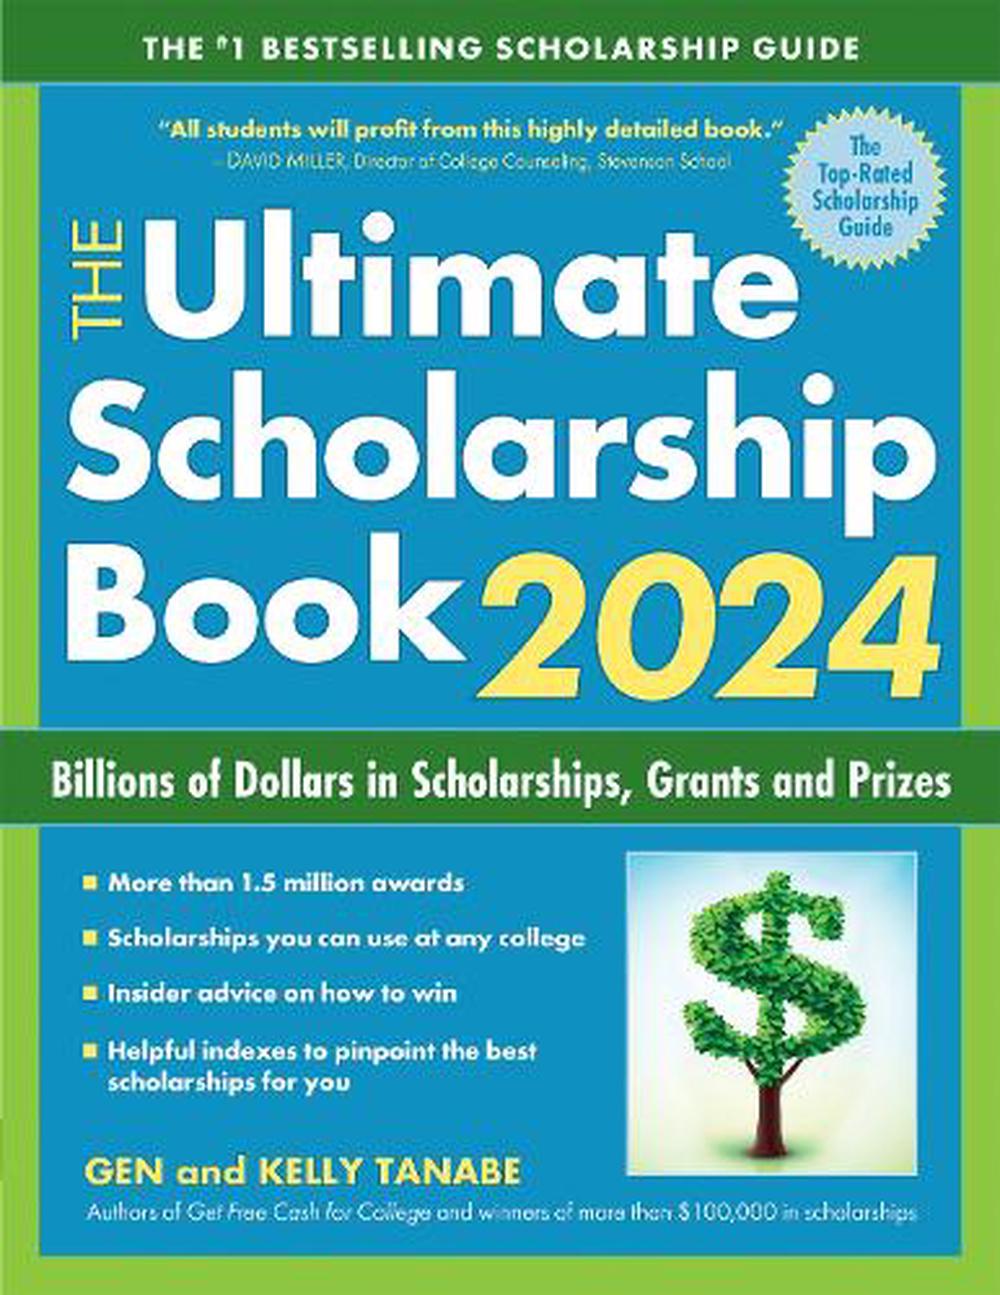 The Ultimate Scholarship Book 2024 by Gen Tanabe, Paperback